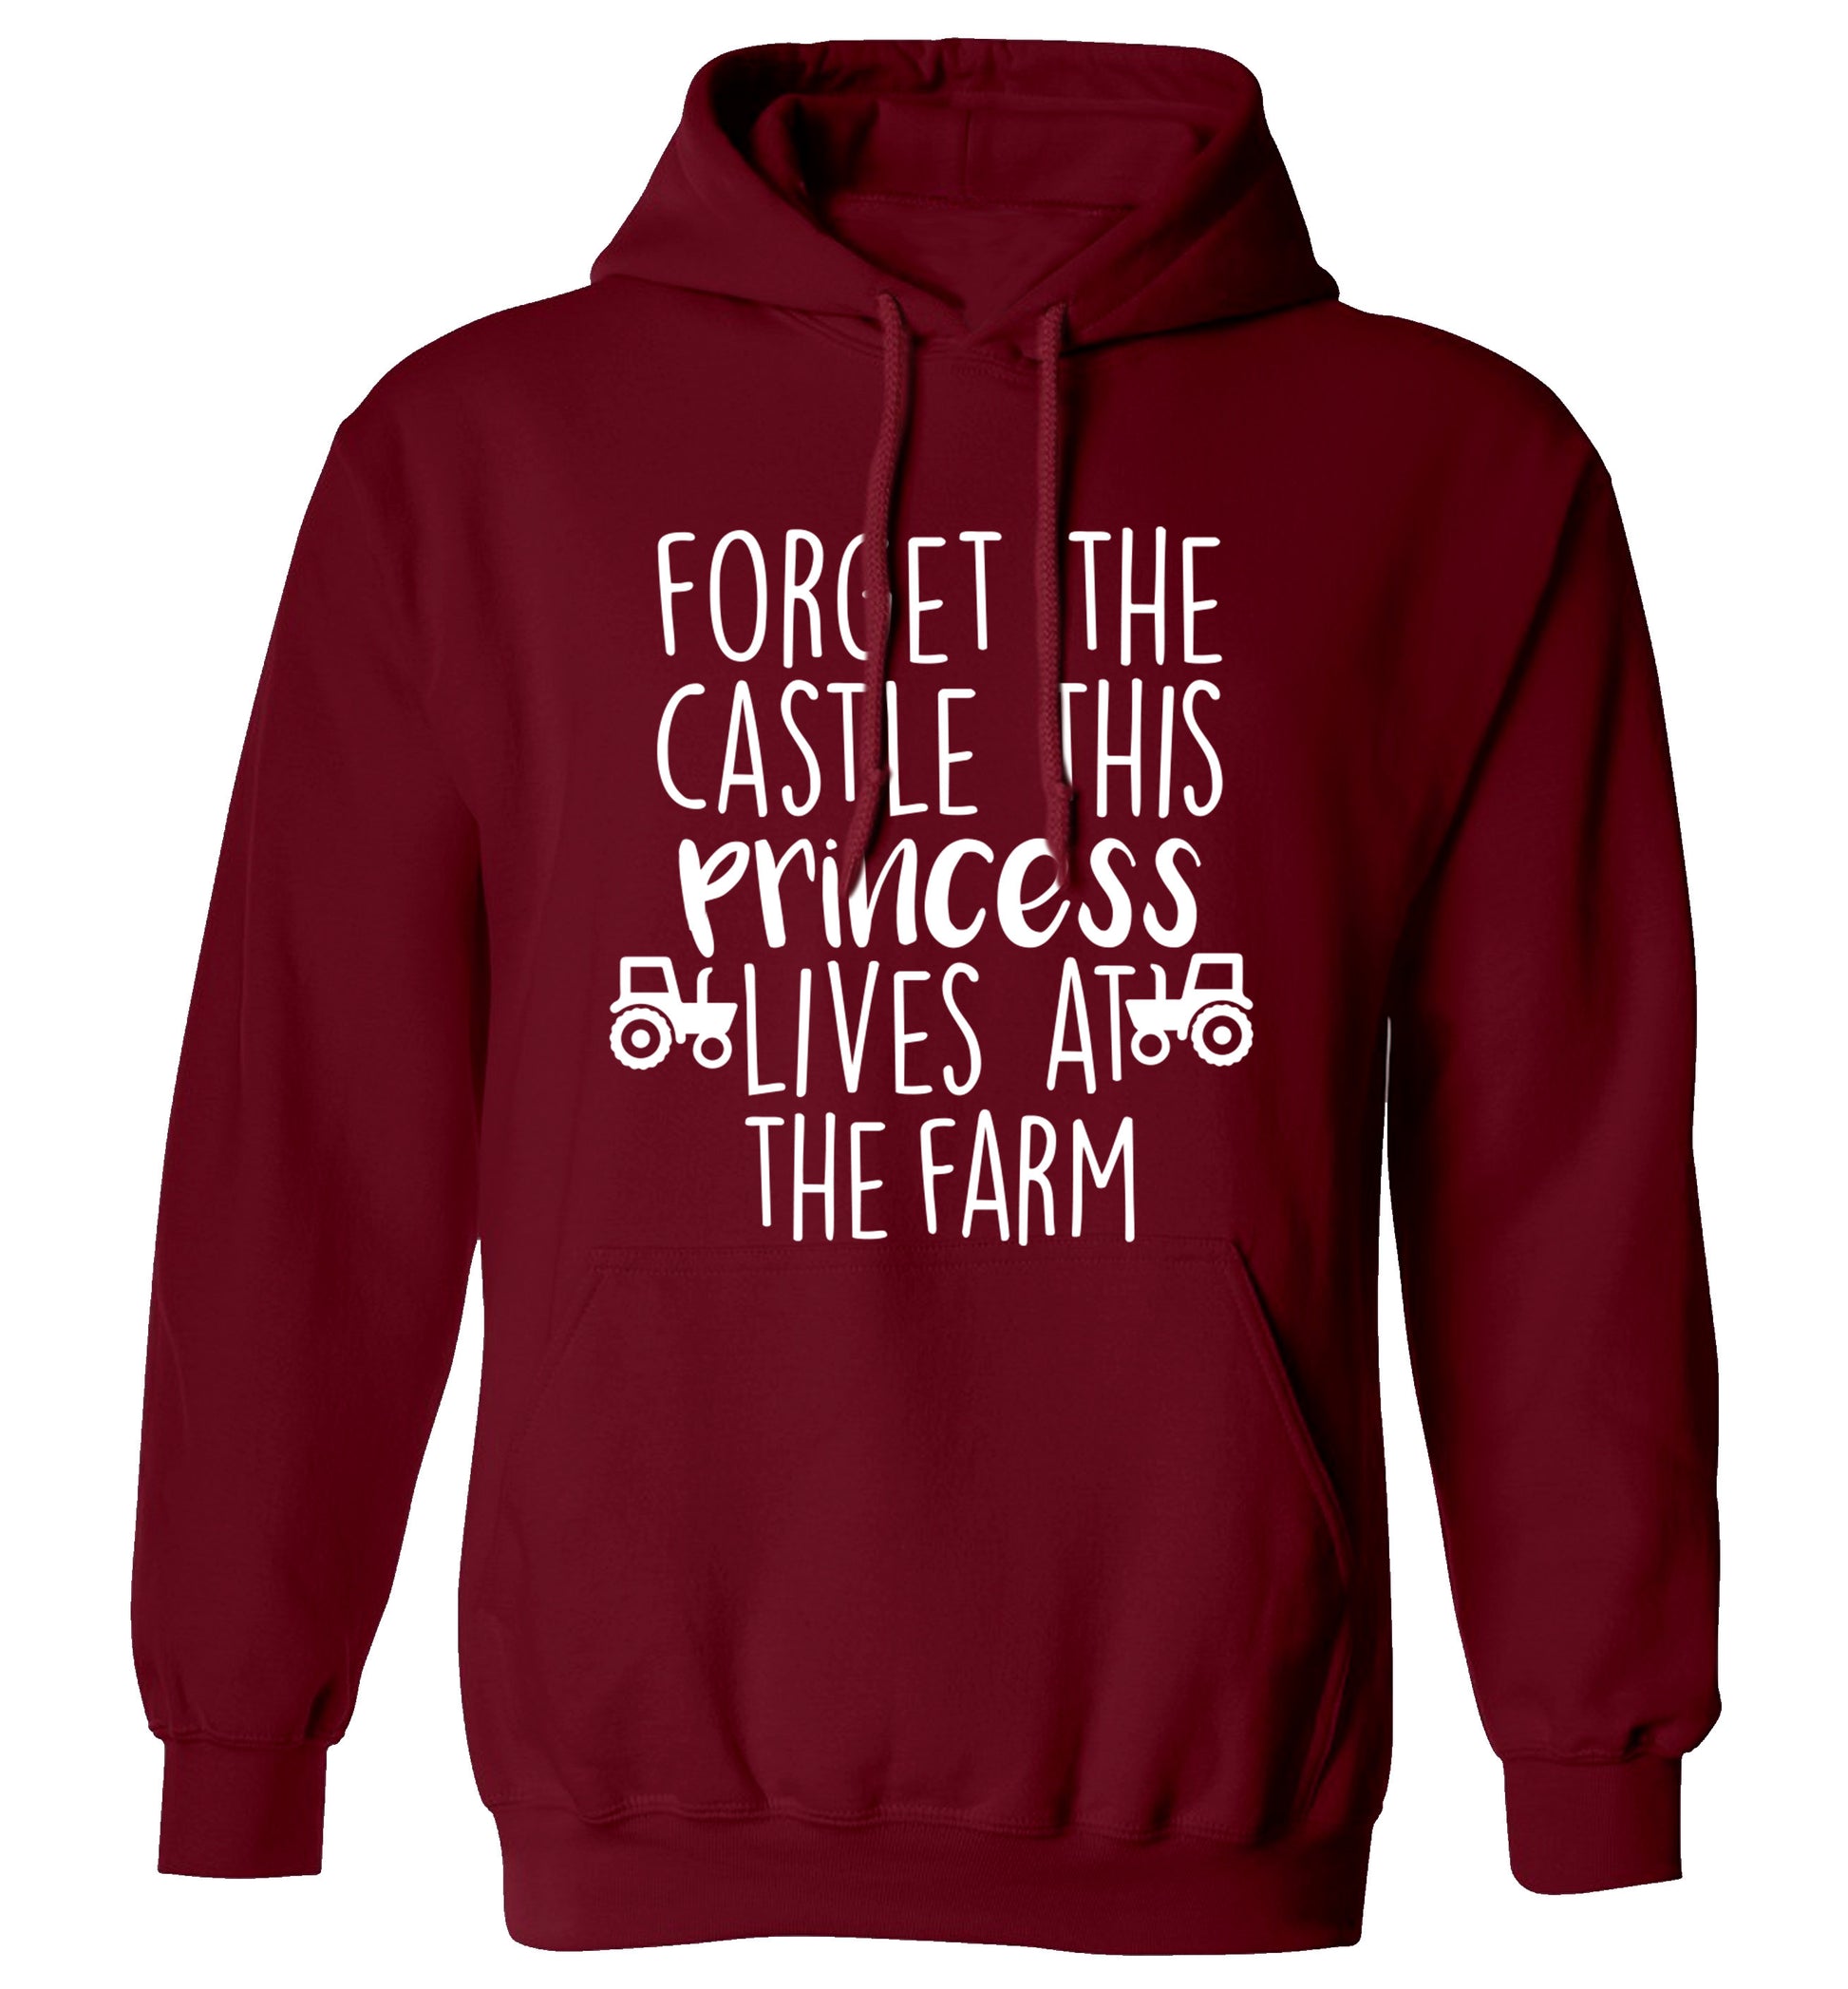 Forget the castle this princess lives at the farm adults unisex maroon hoodie 2XL